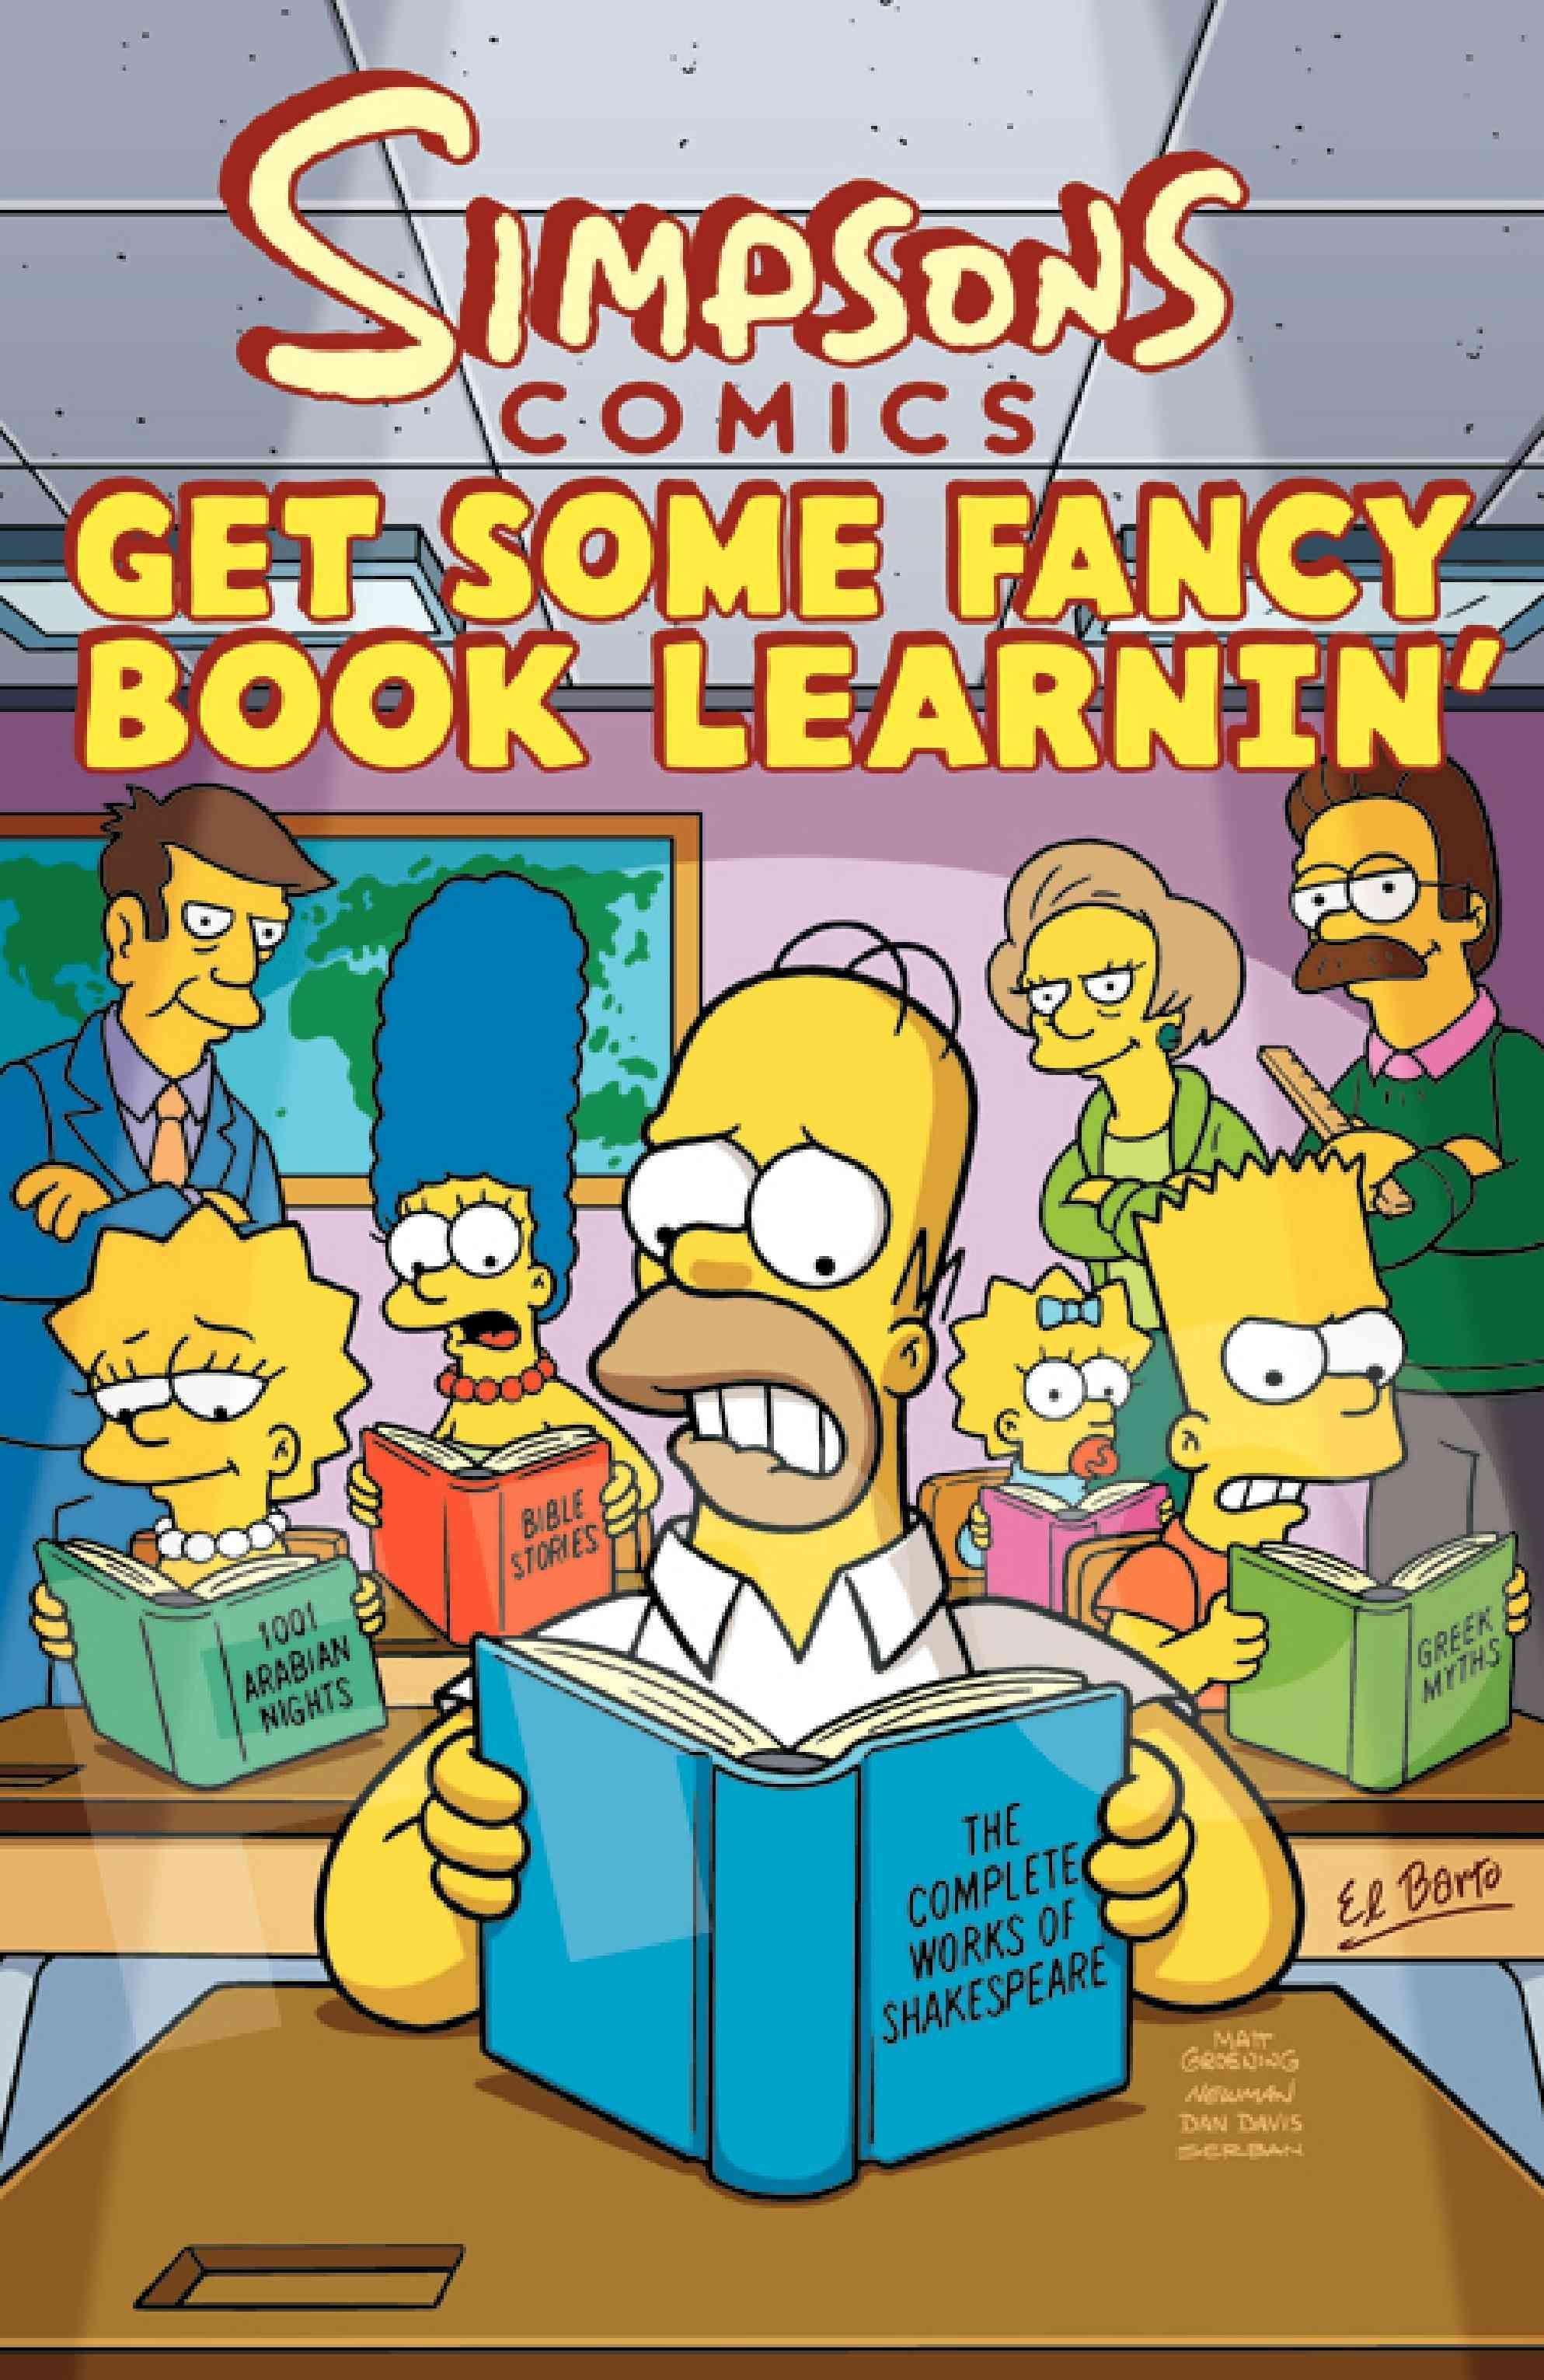 Buy Simpsons Comics Get Some Fancy Book Learnin by Matt Groening With Free Delivery wordery